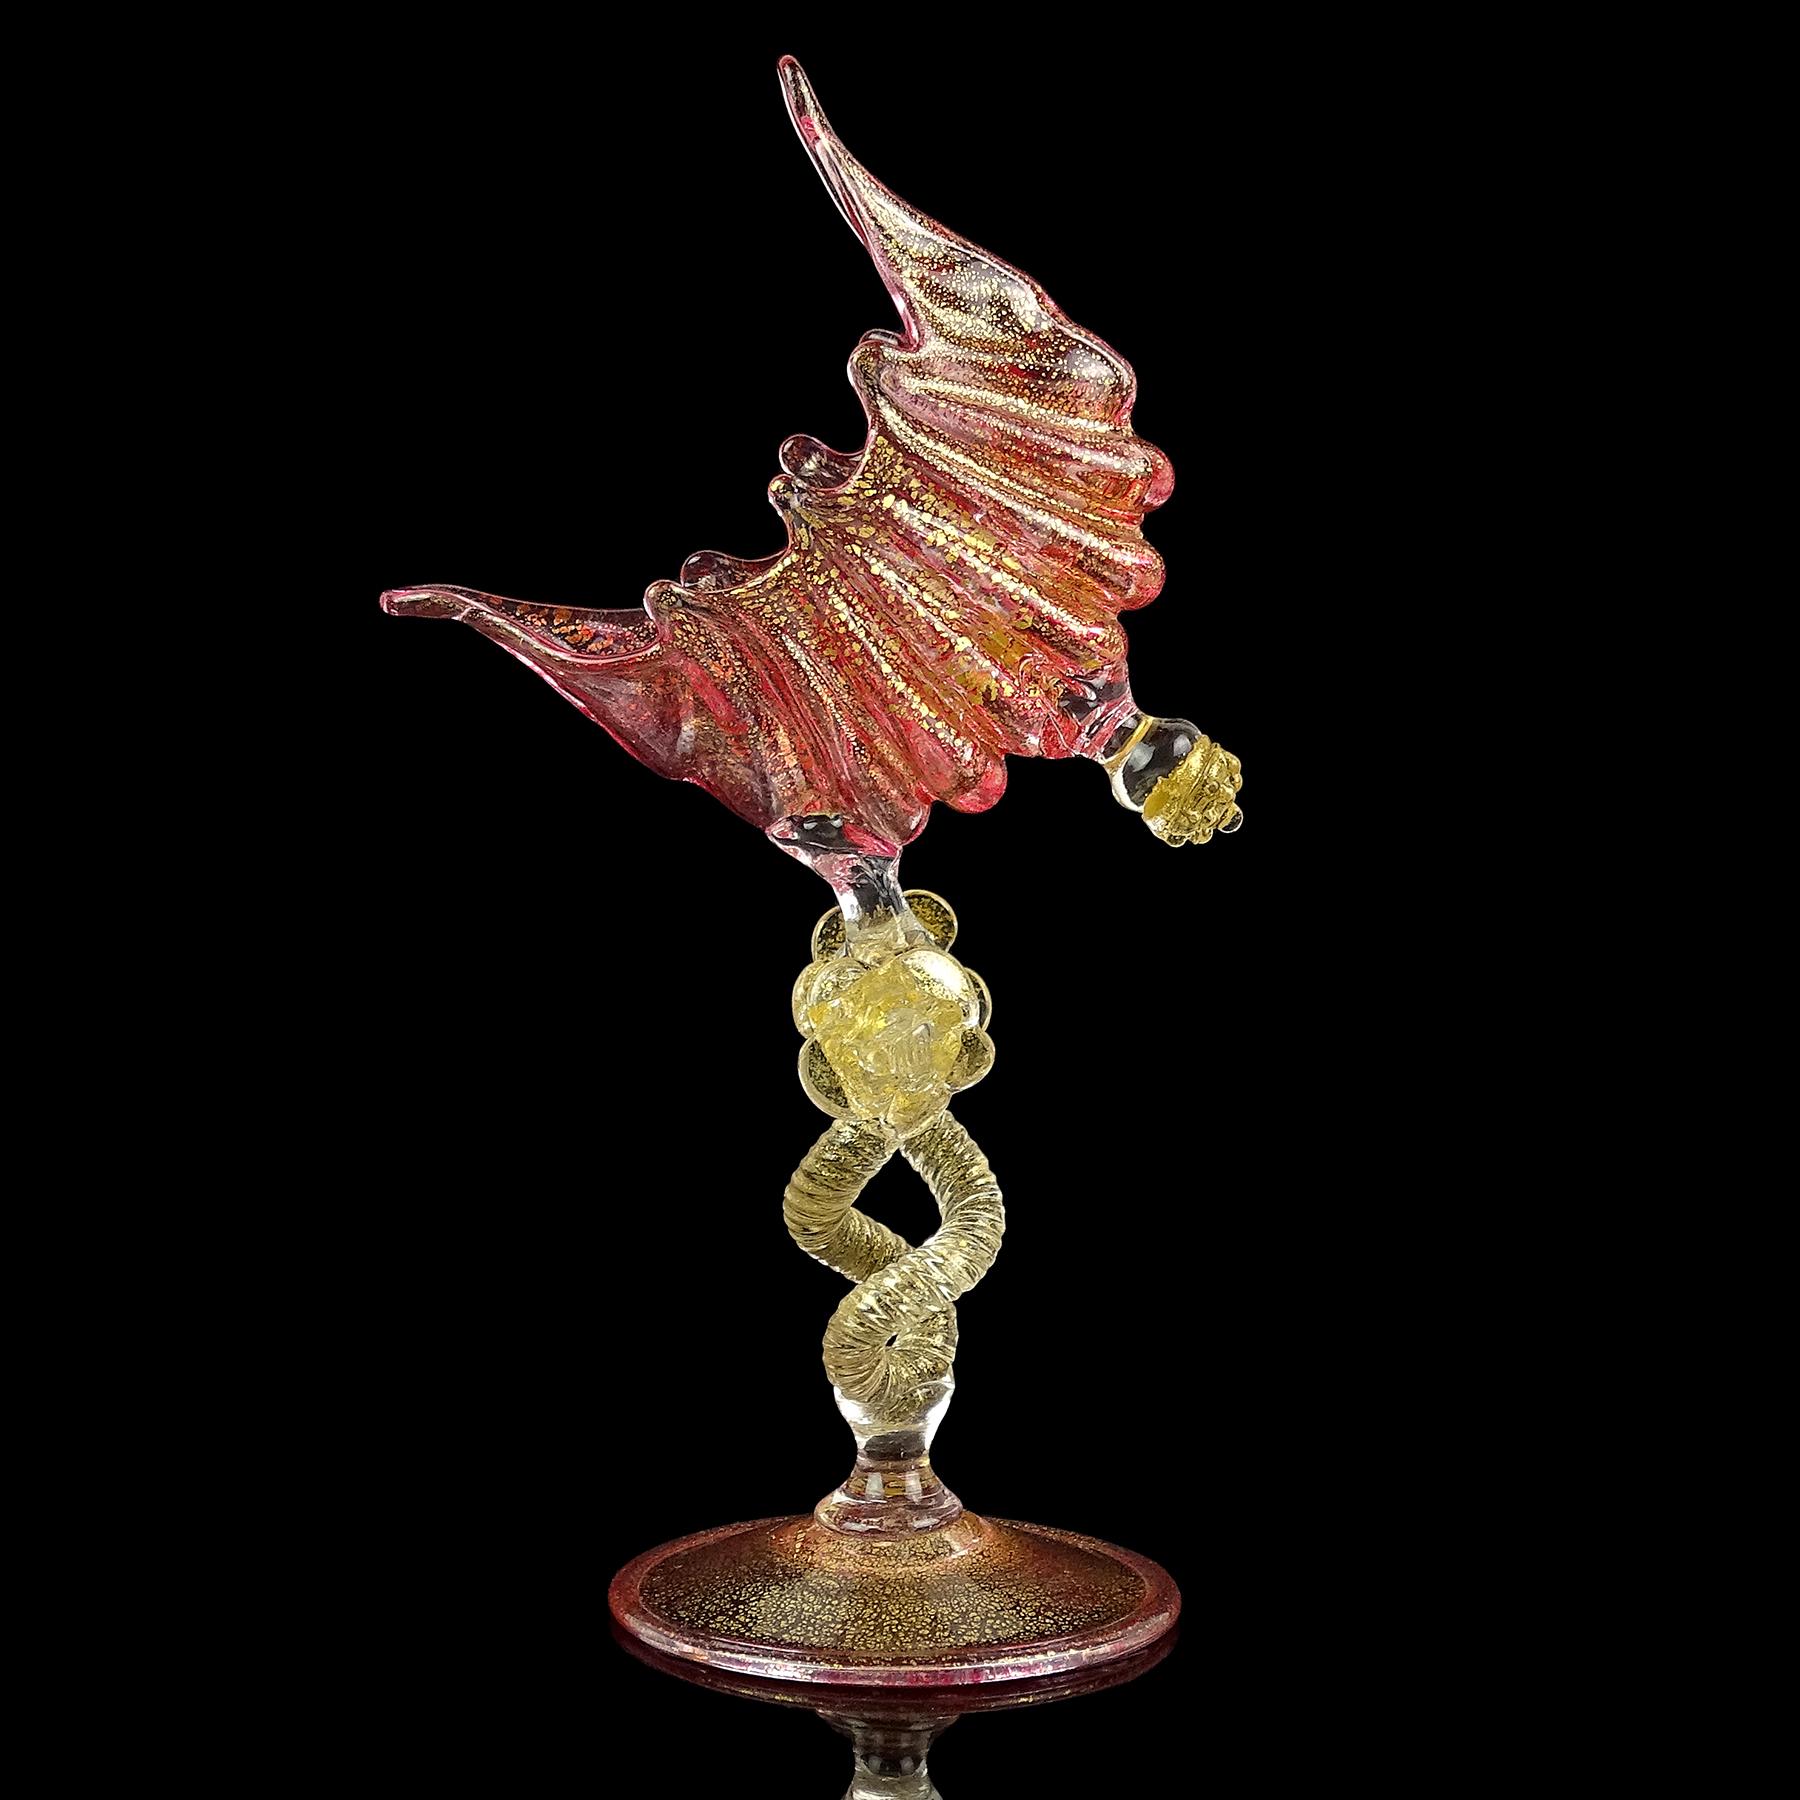 Beautiful, antique, early Venetian / Murano hand blown pink and gold flecks Italian art glass seashell decoration decorative table object / card holder. Documented to the Salviati company, circa 1890-1900. The stem of the piece is made with 2